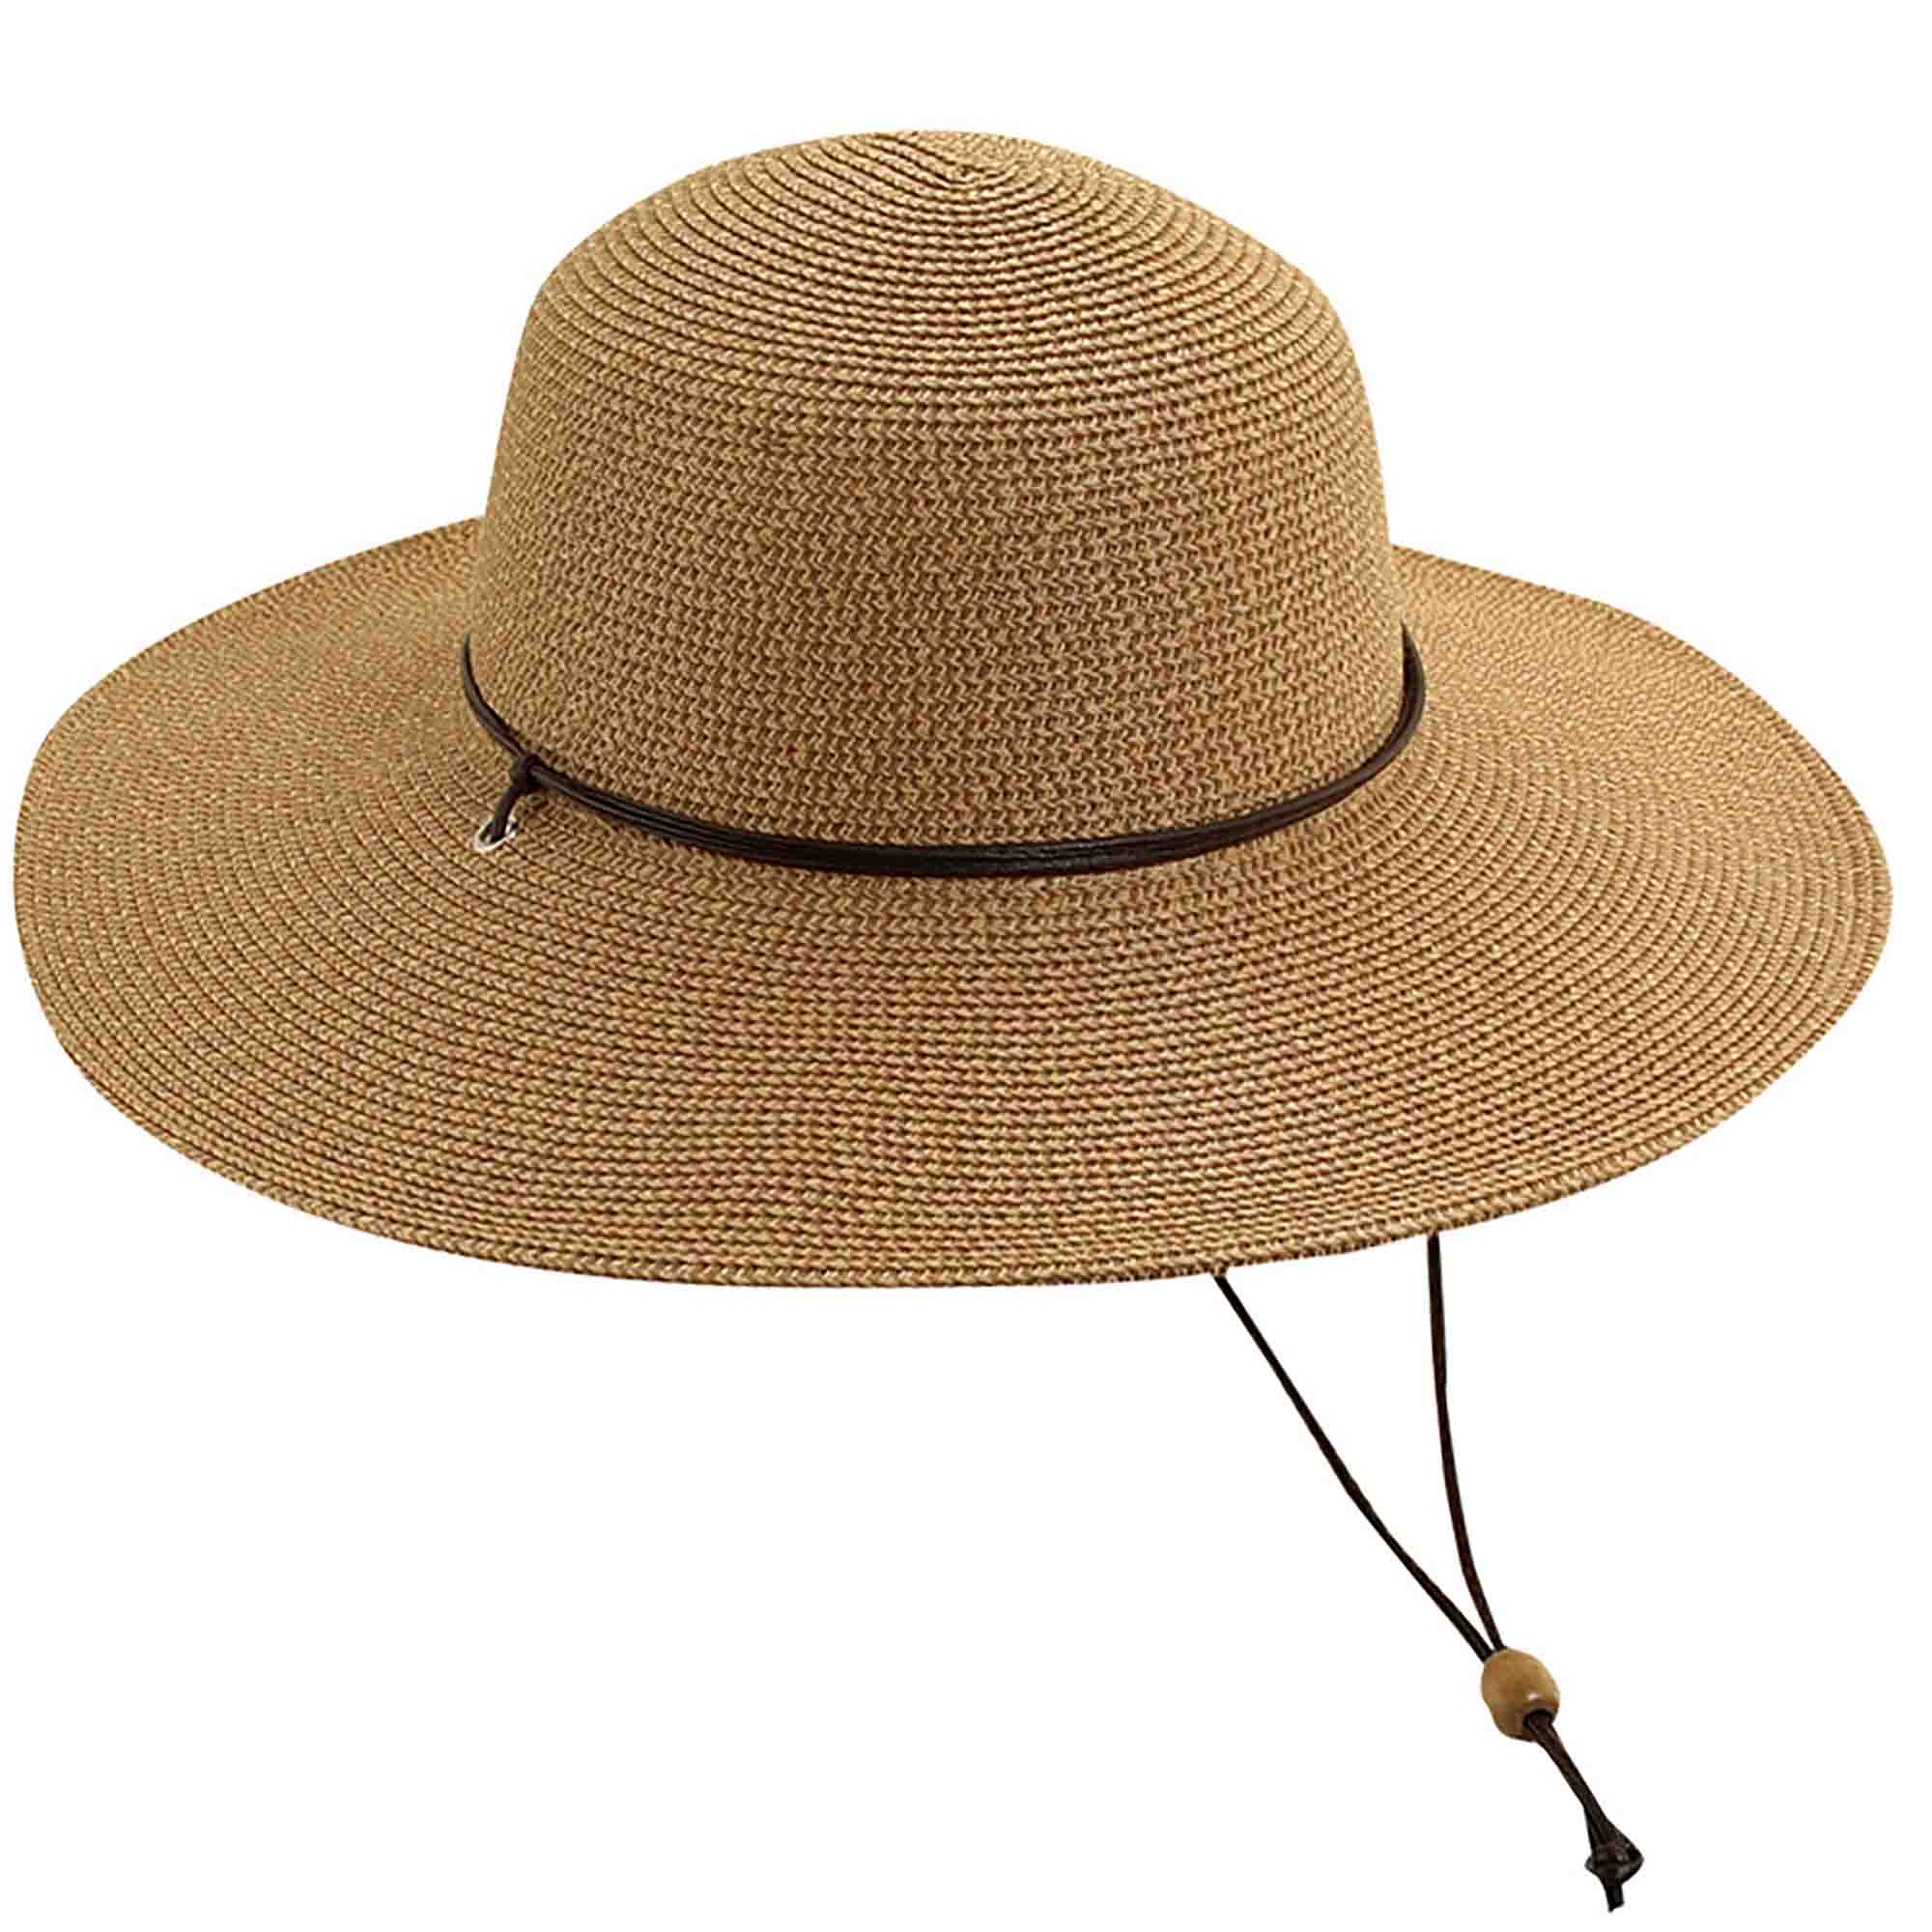 Tweed Summer Floppy Hat with Chin Strap - Scala Hats Brown